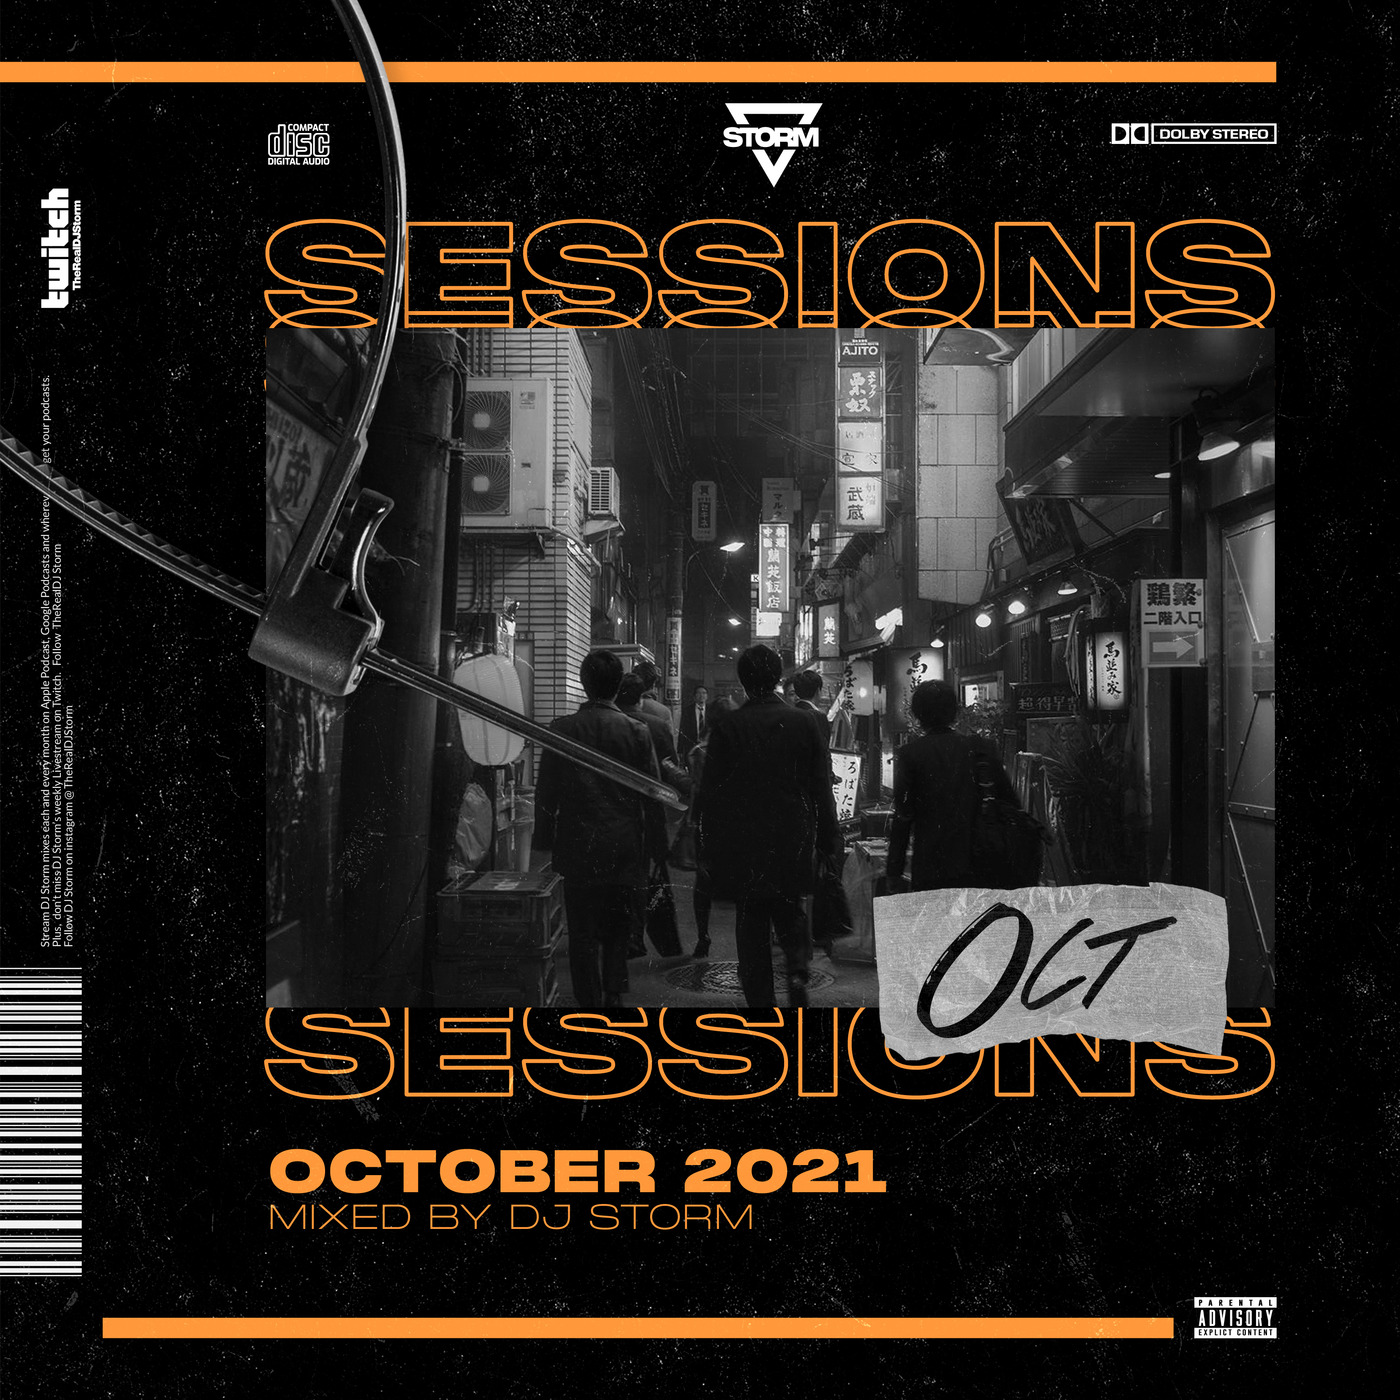 The Sessions: October 2021